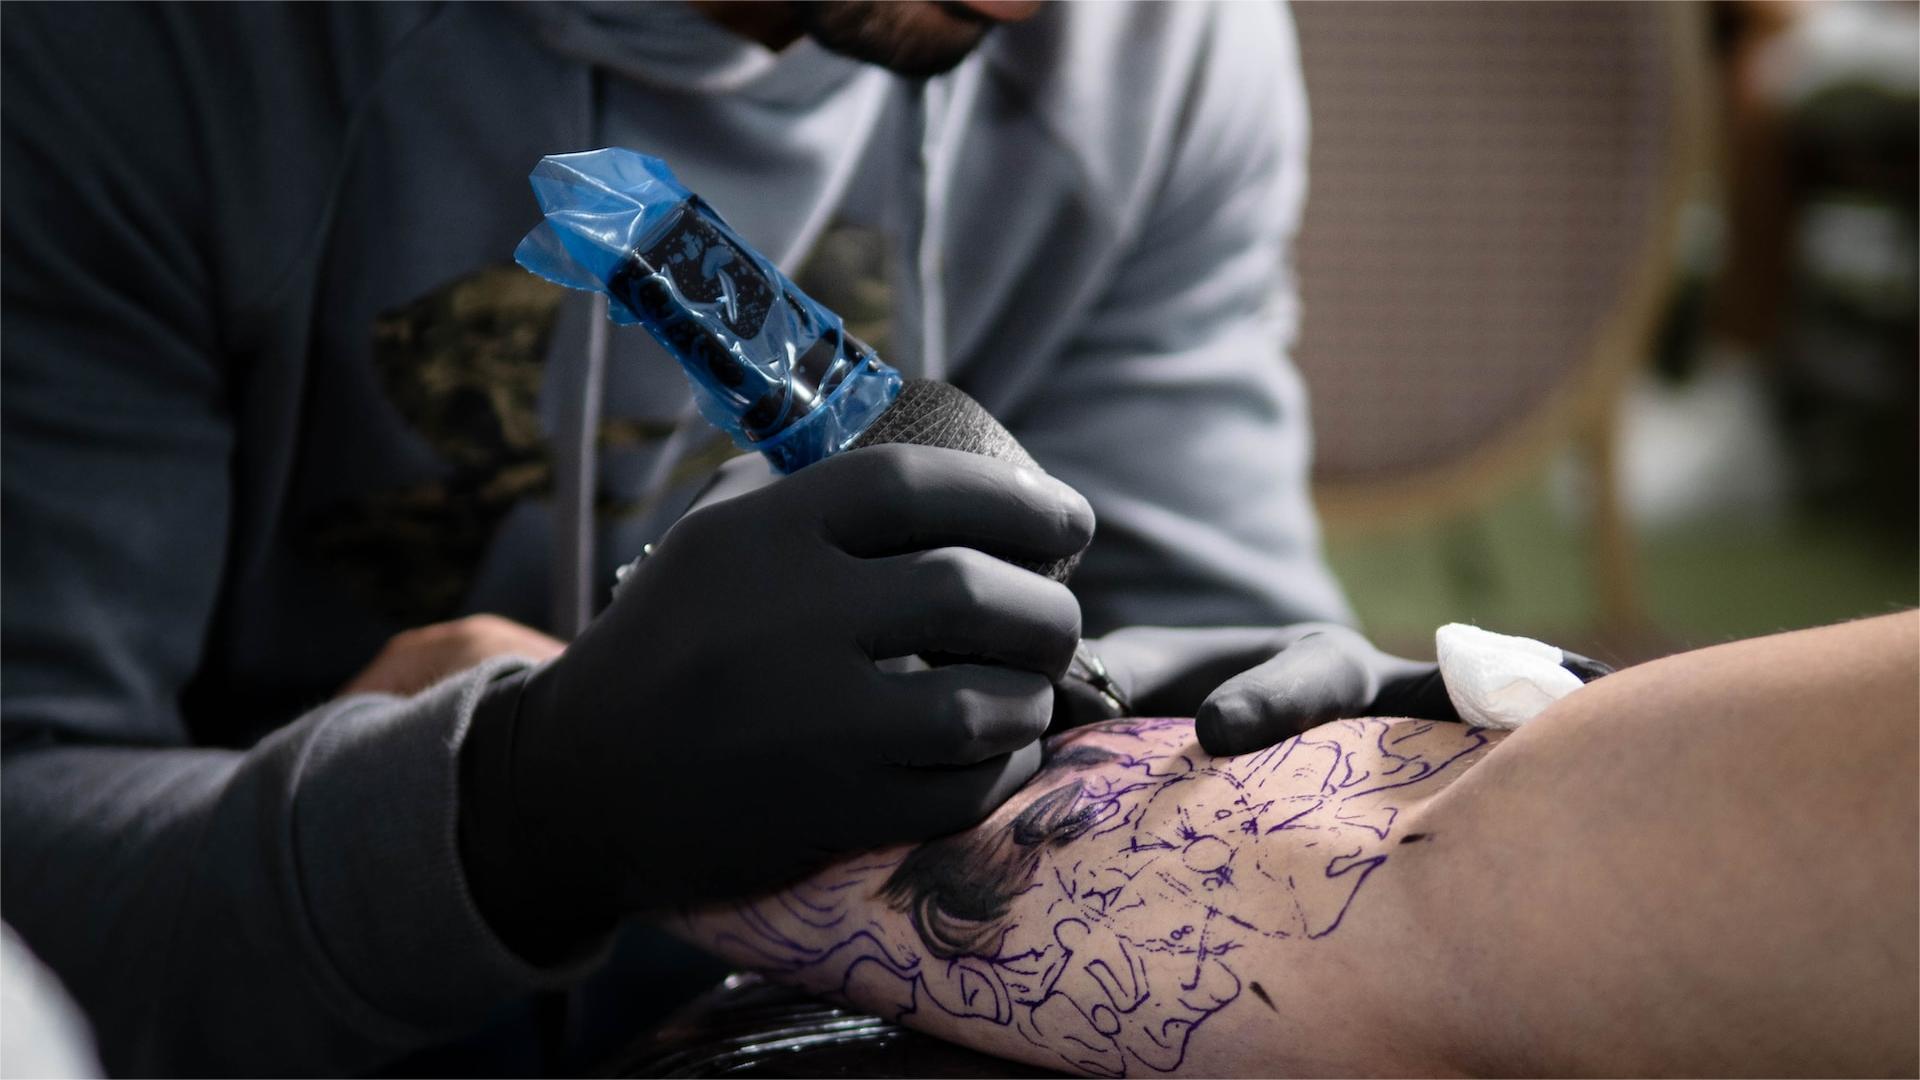 What You Need to Know Before Tattooing as a Beginner